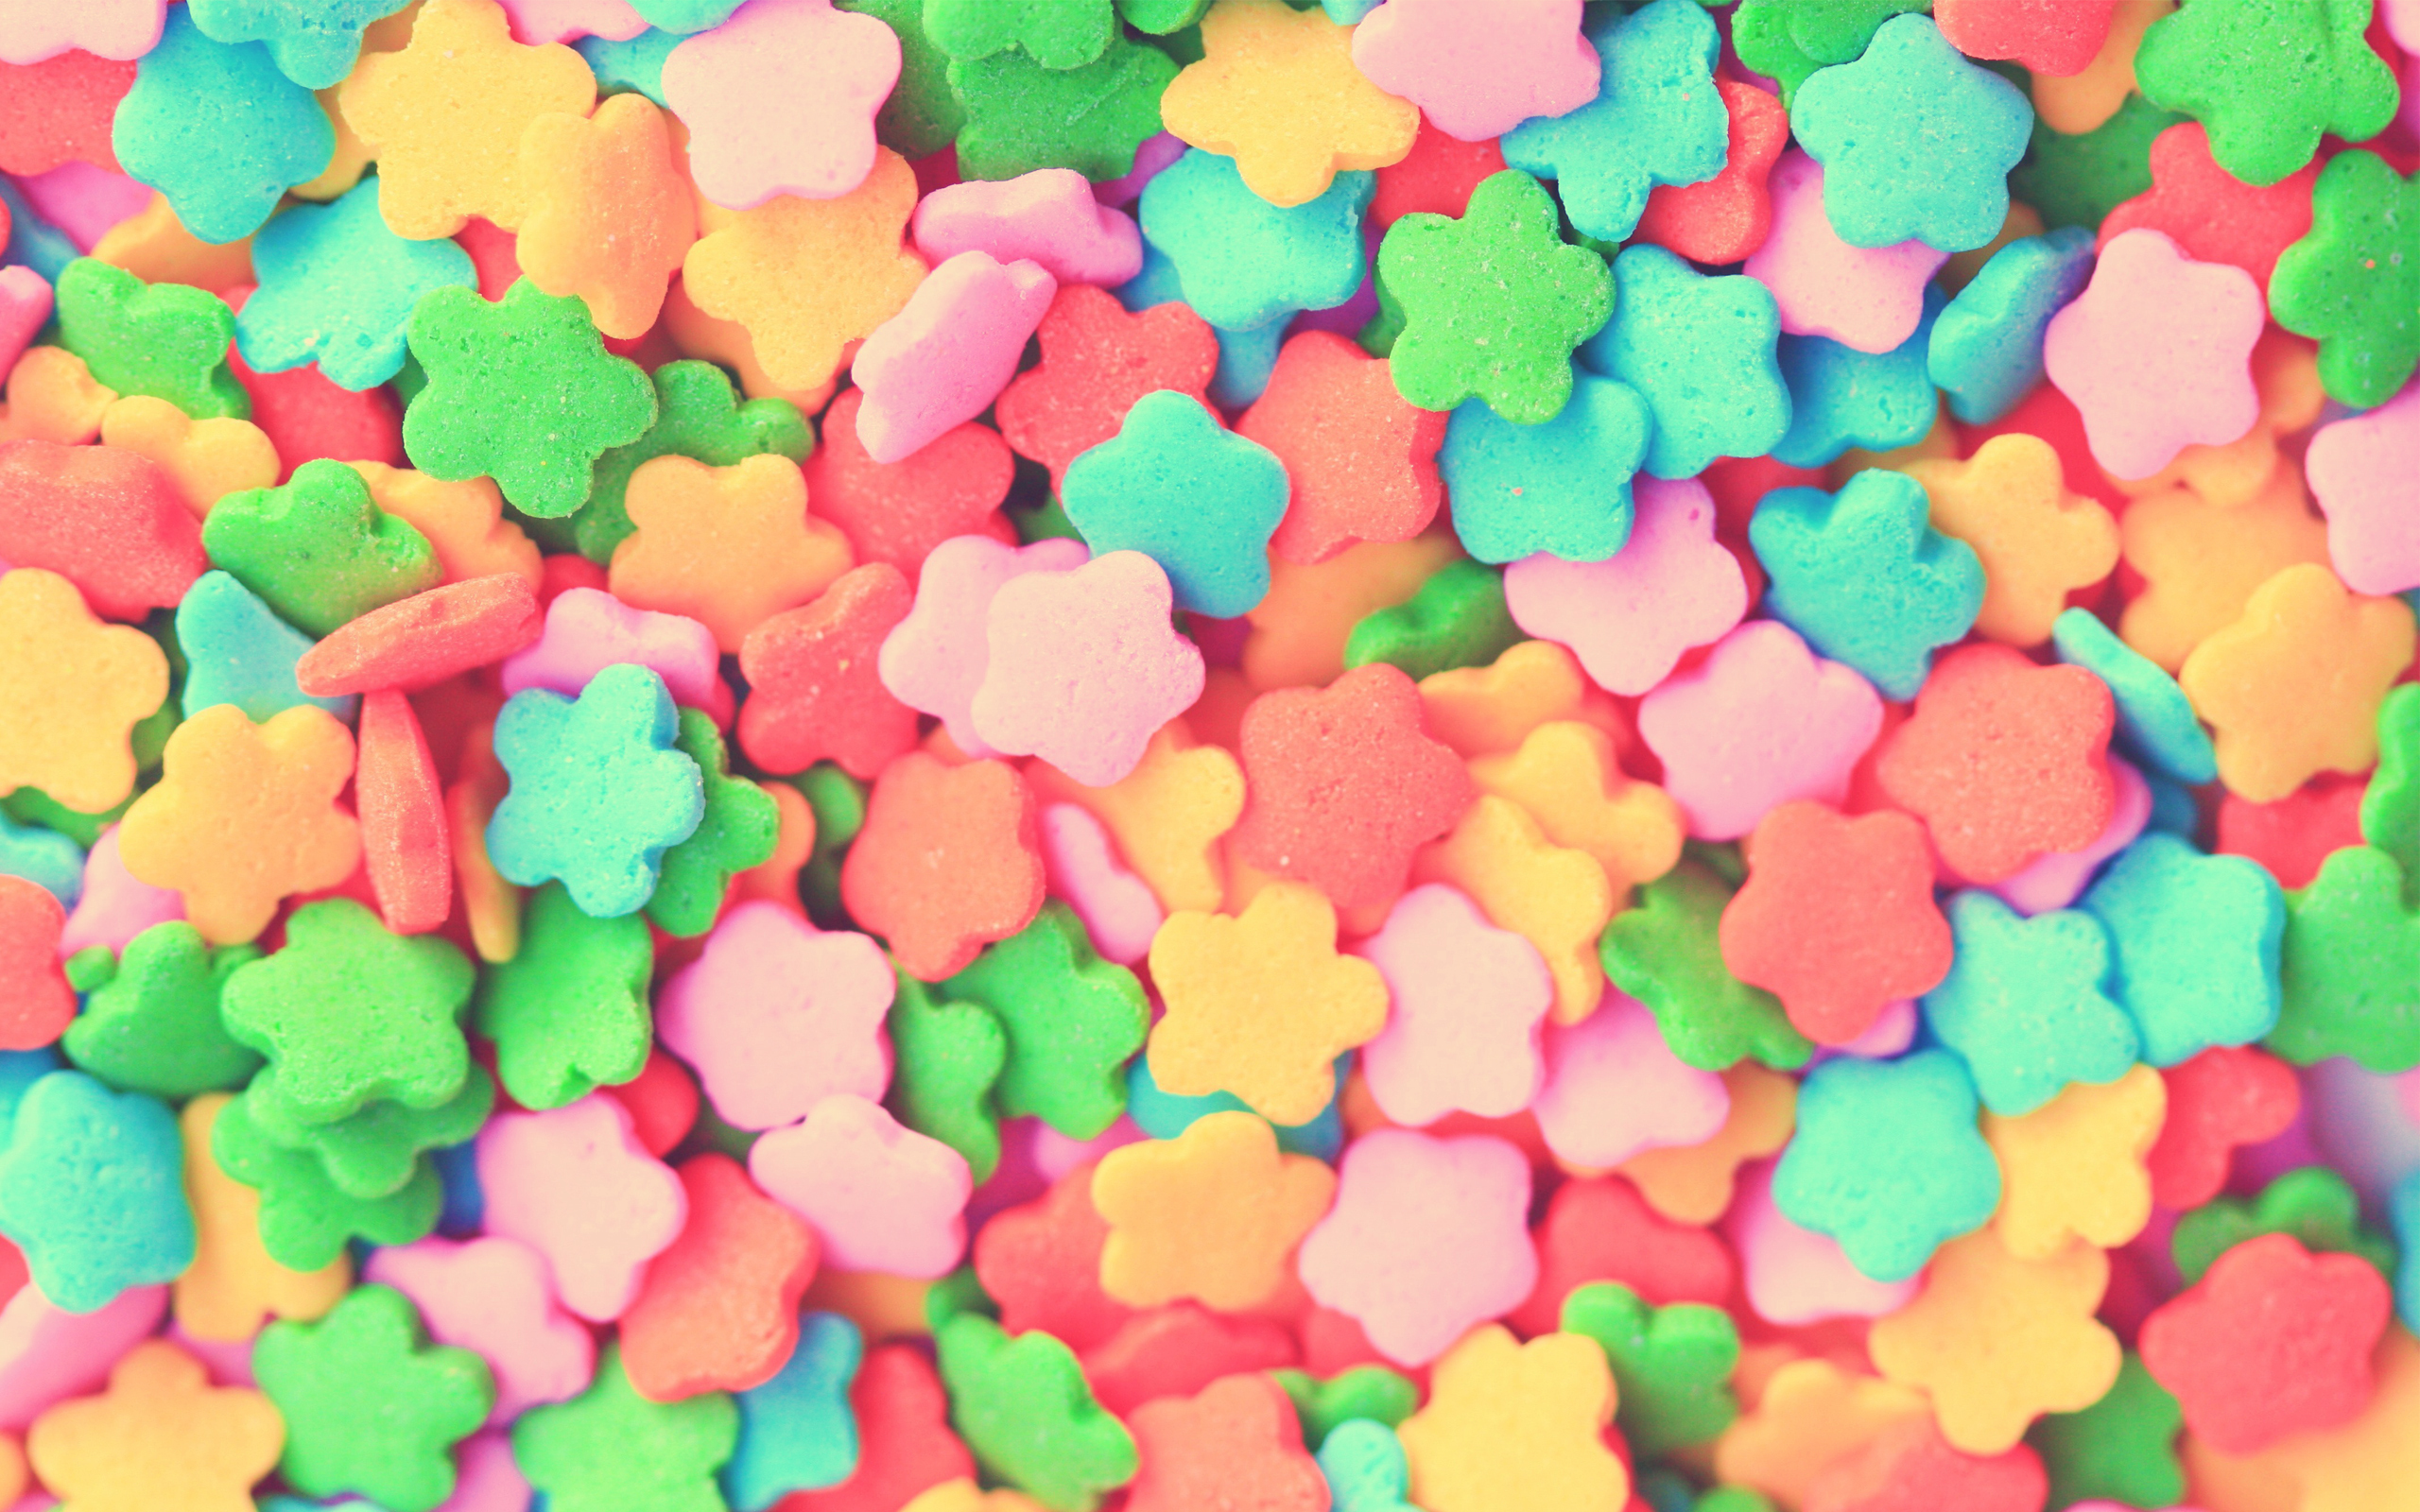 Candy Computer Wallpapers, Desktop Backgrounds 2560x1600 ID326990